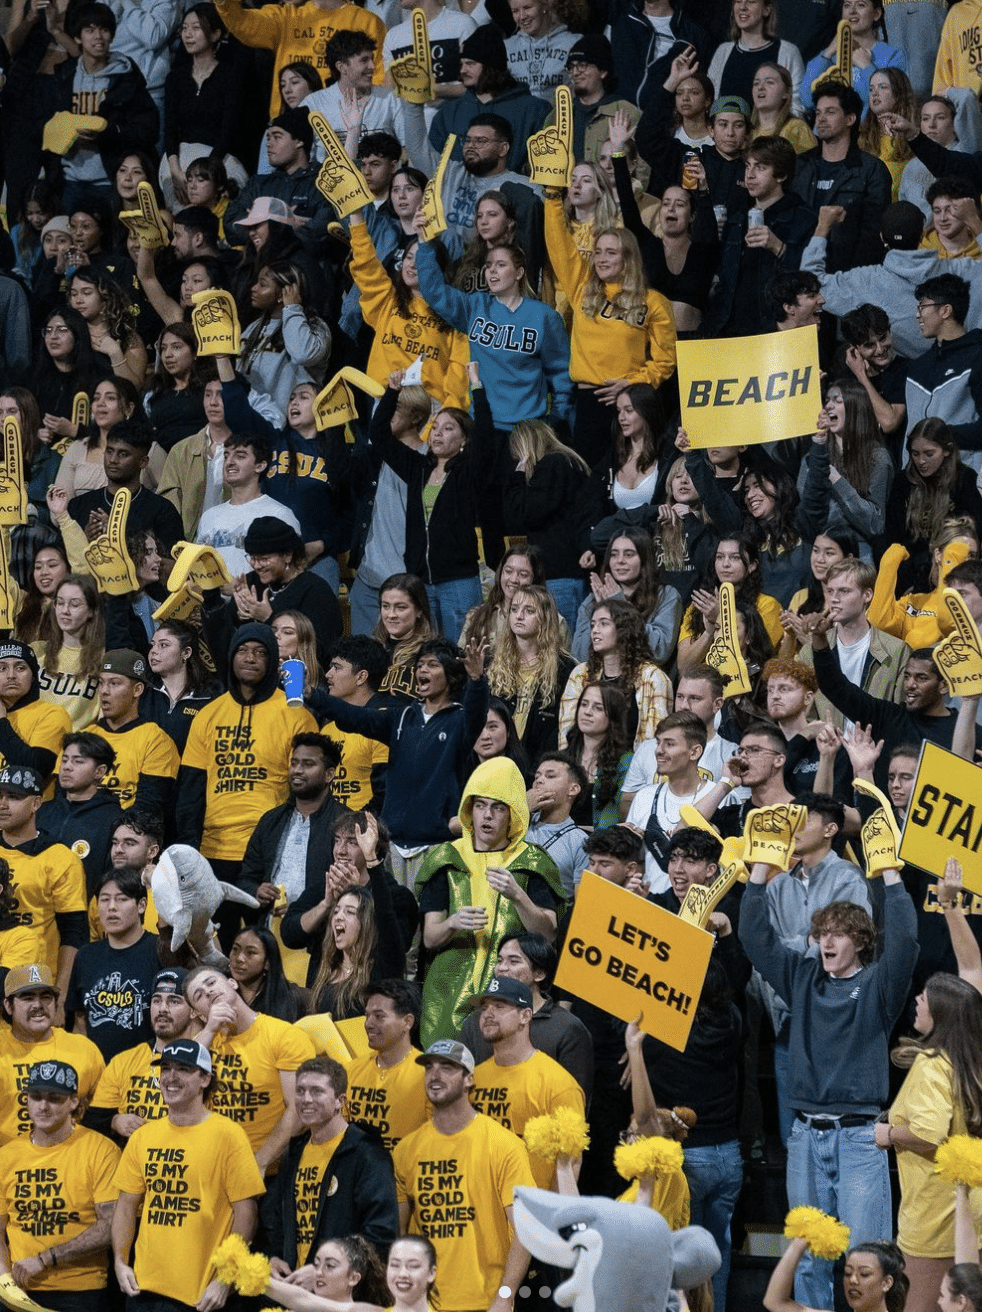 LSBU Sandpit student section, dressed in yellow, passionately cheering at a men's basketball game with energetic enthusiasm, rallying with 'Let's Go Beach' spirit.